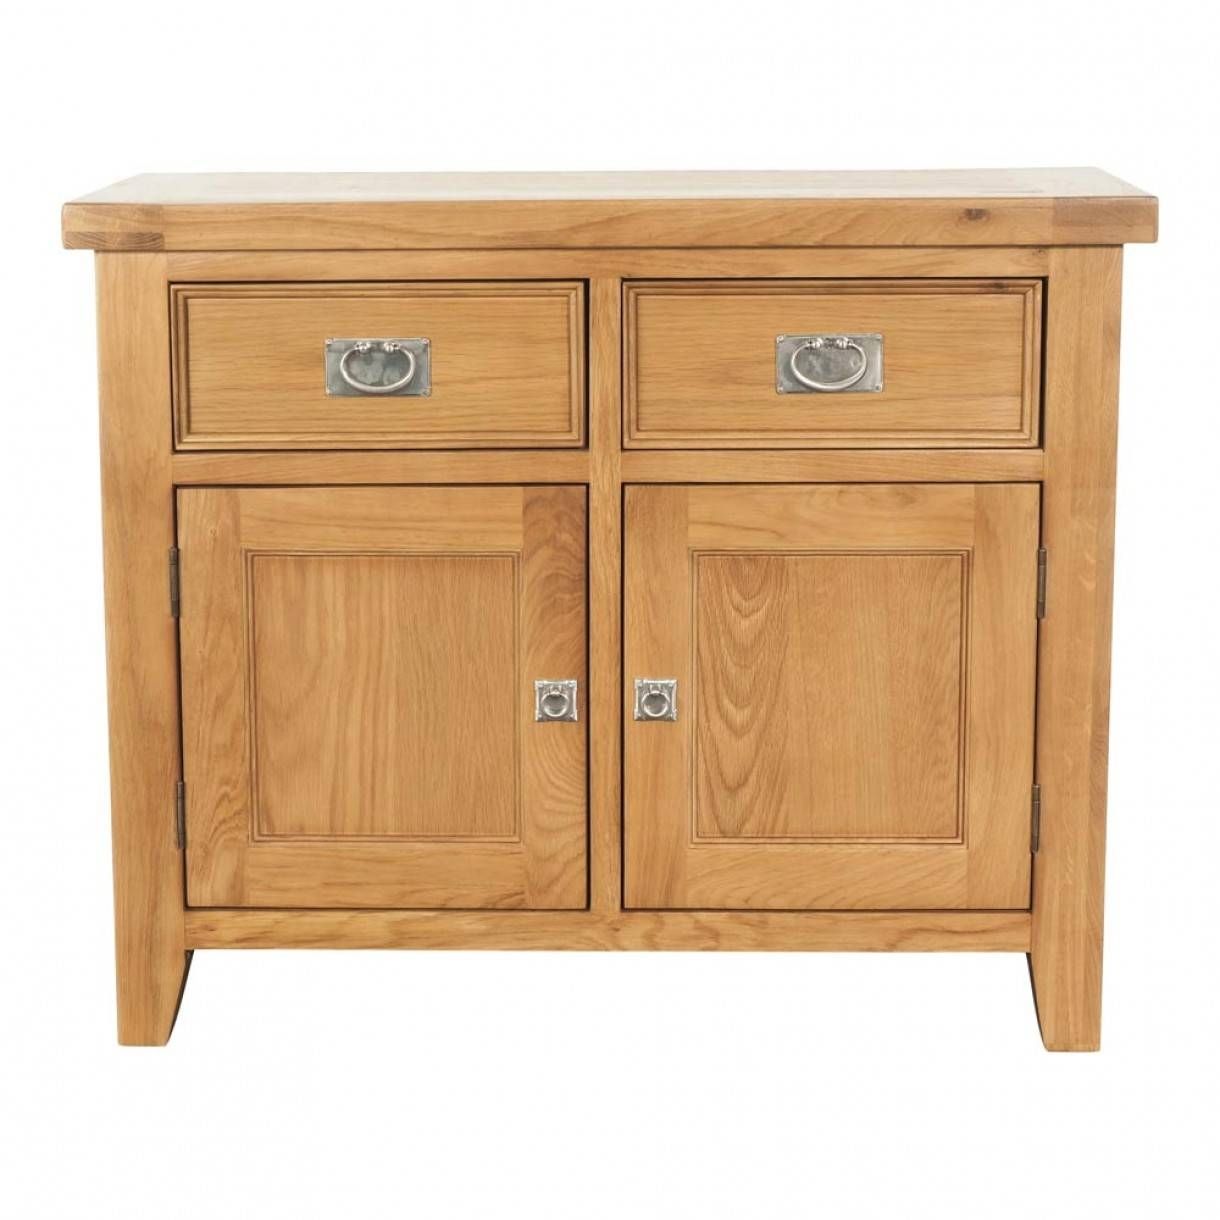 Buy Buffets And Sideboards Online | Dining | Early Settler Furniture For Small Sideboards For Sale (View 15 of 20)